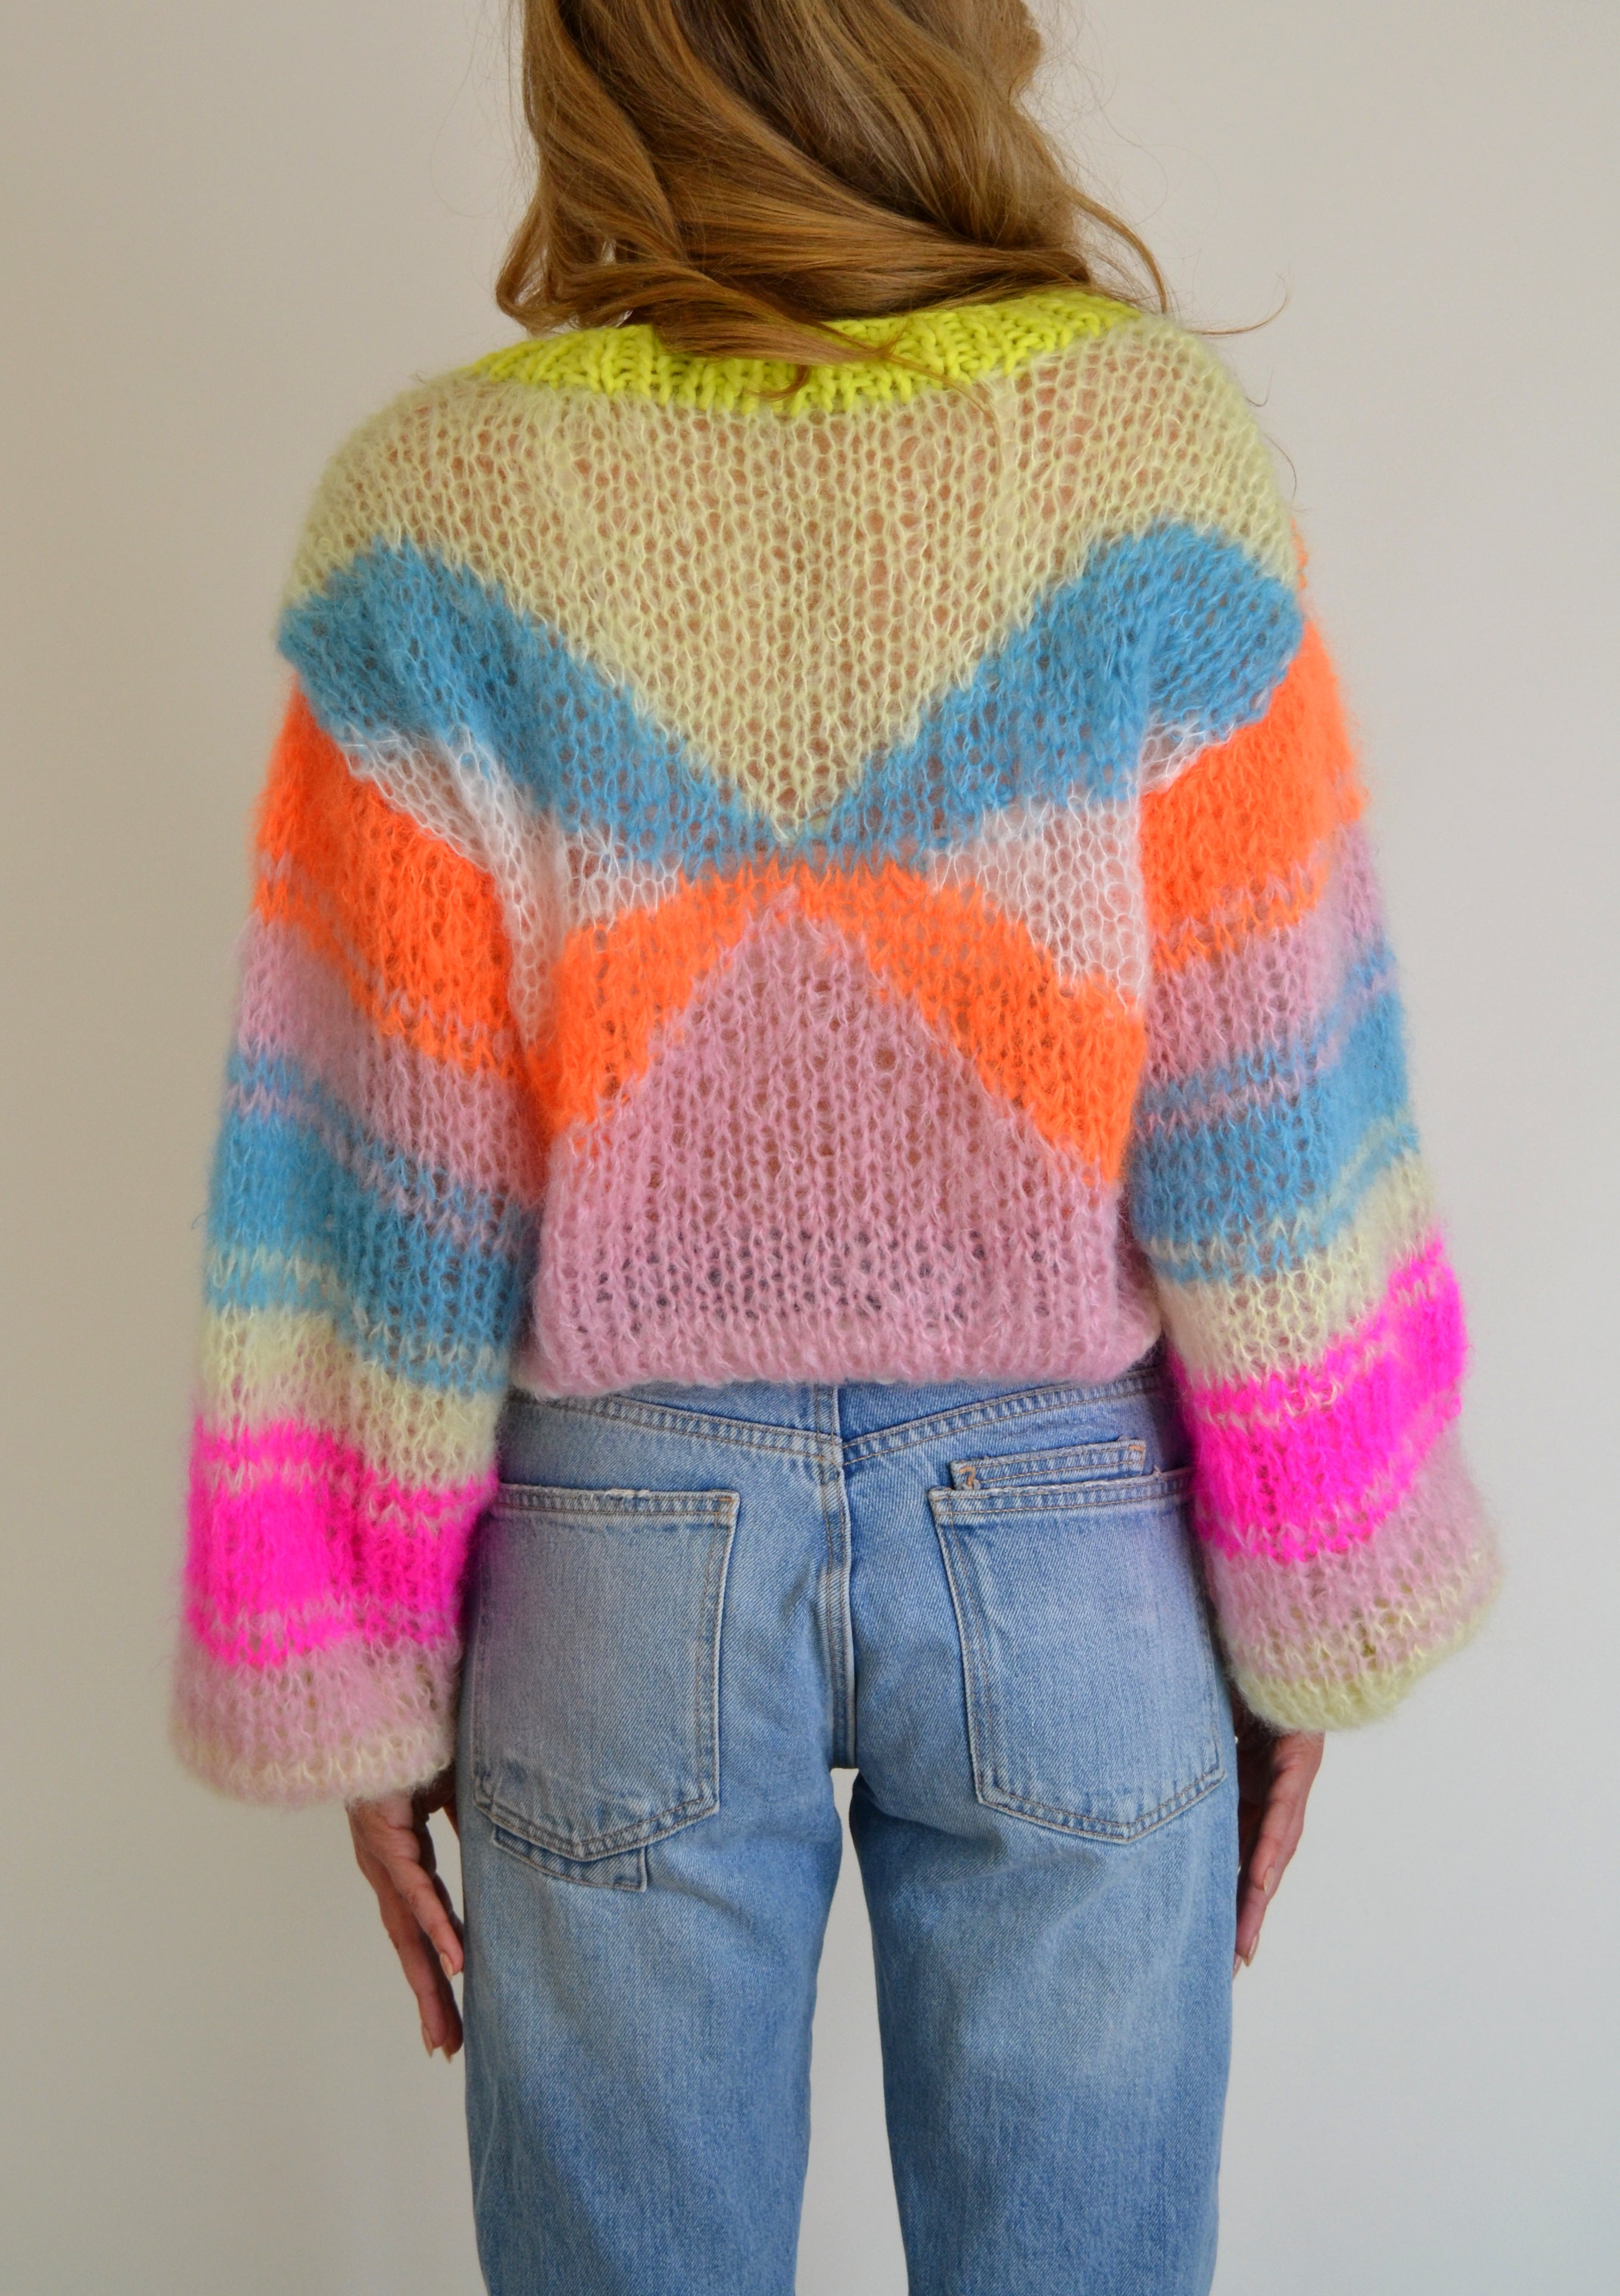 Handknitted sweater,colorful knitwear, handmade sweater, Handmade cardigan, Hnadknitted cardigan, Handcrocheted dress, colorful fashion